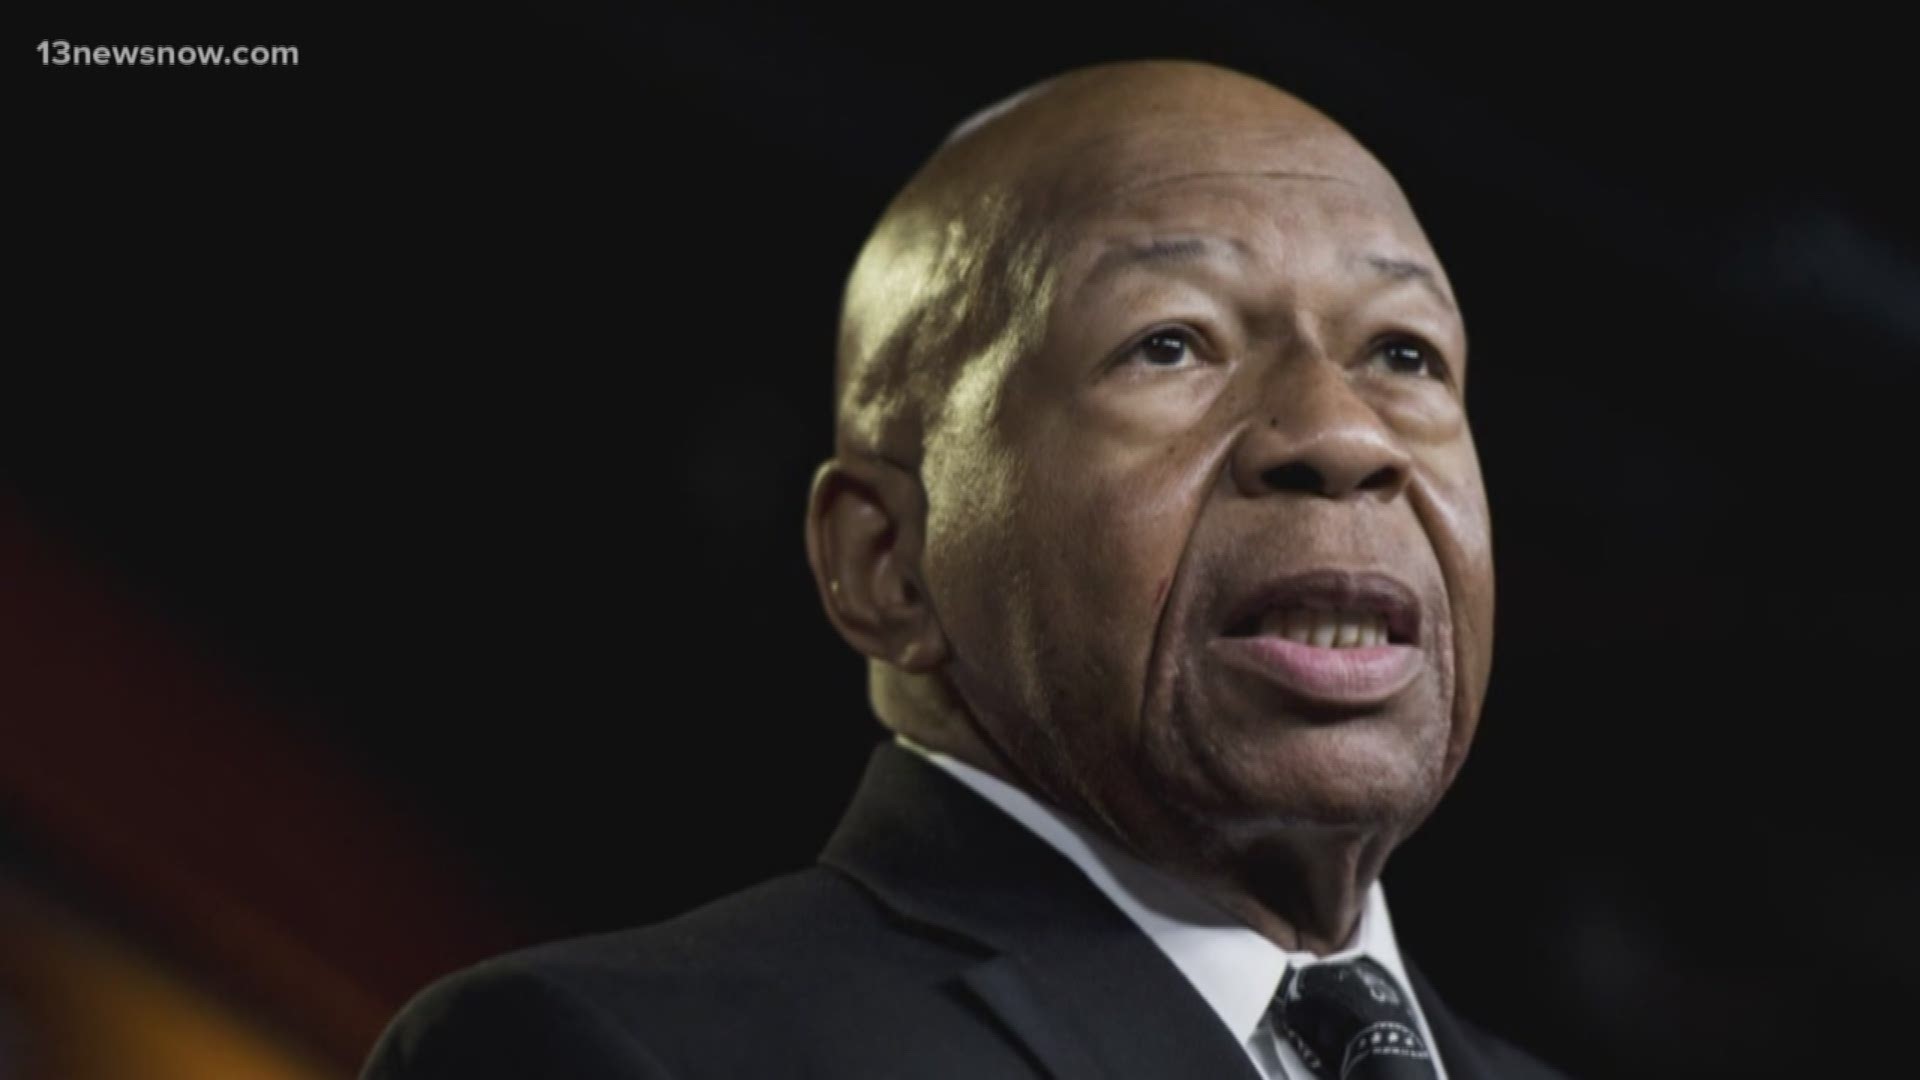 Maryland Rep. Elijah E. Cummings died early Thursday at Johns Hopkins Hospital due to complications from longstanding health challenges.